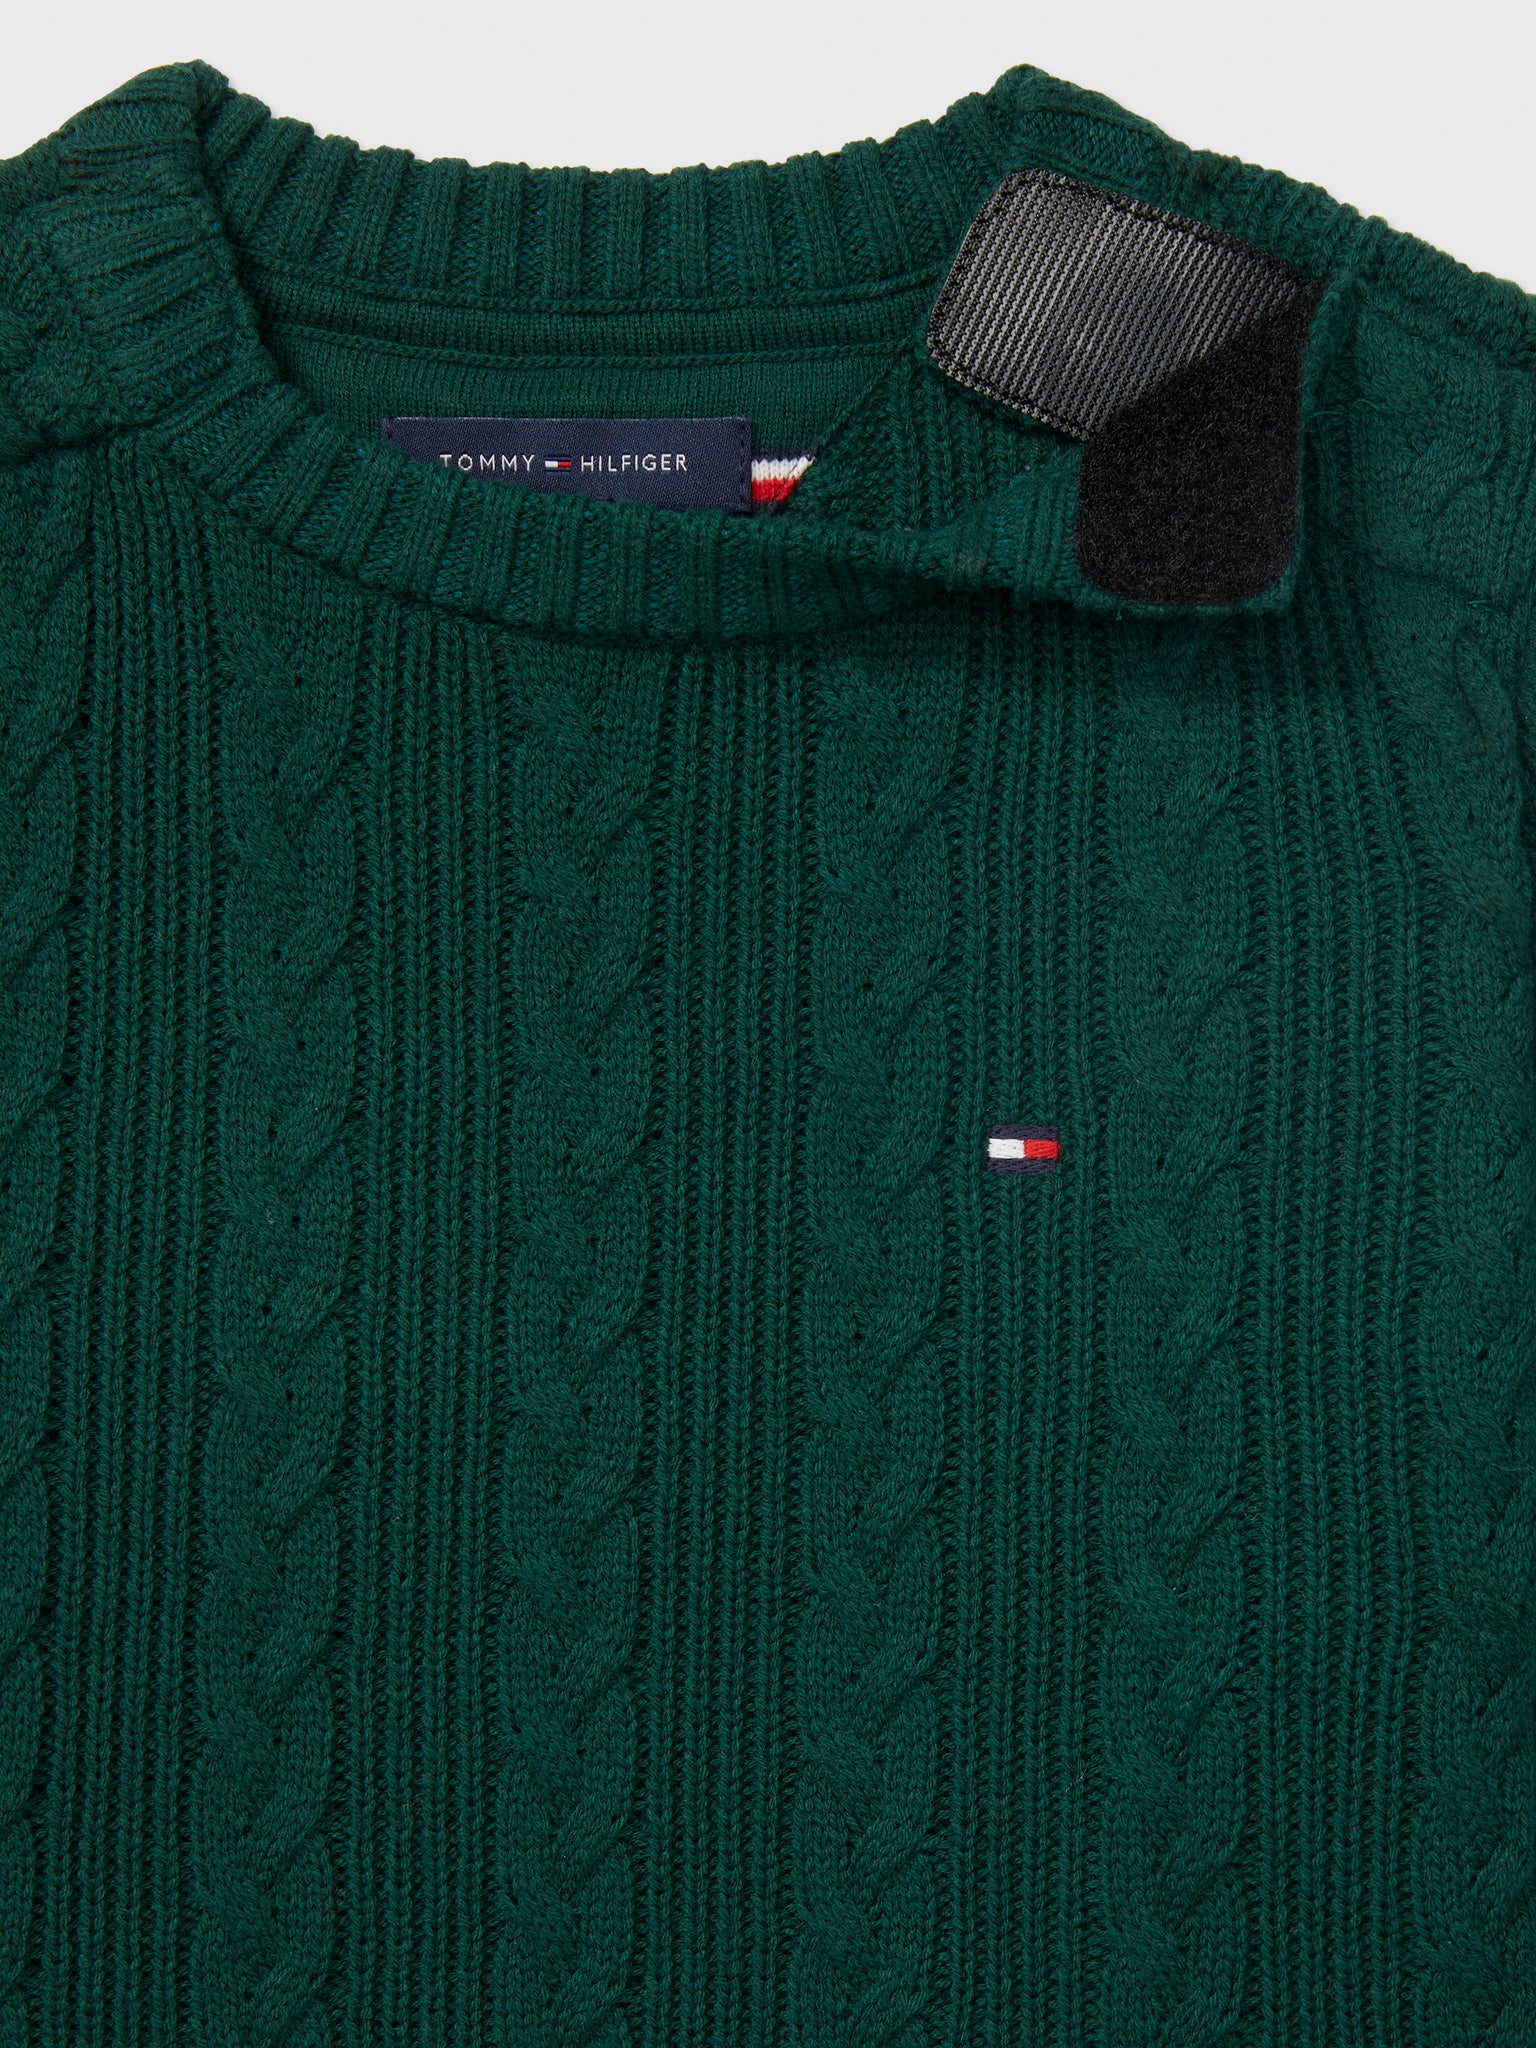 Cable Sweater (Kids) - Ornamental Green